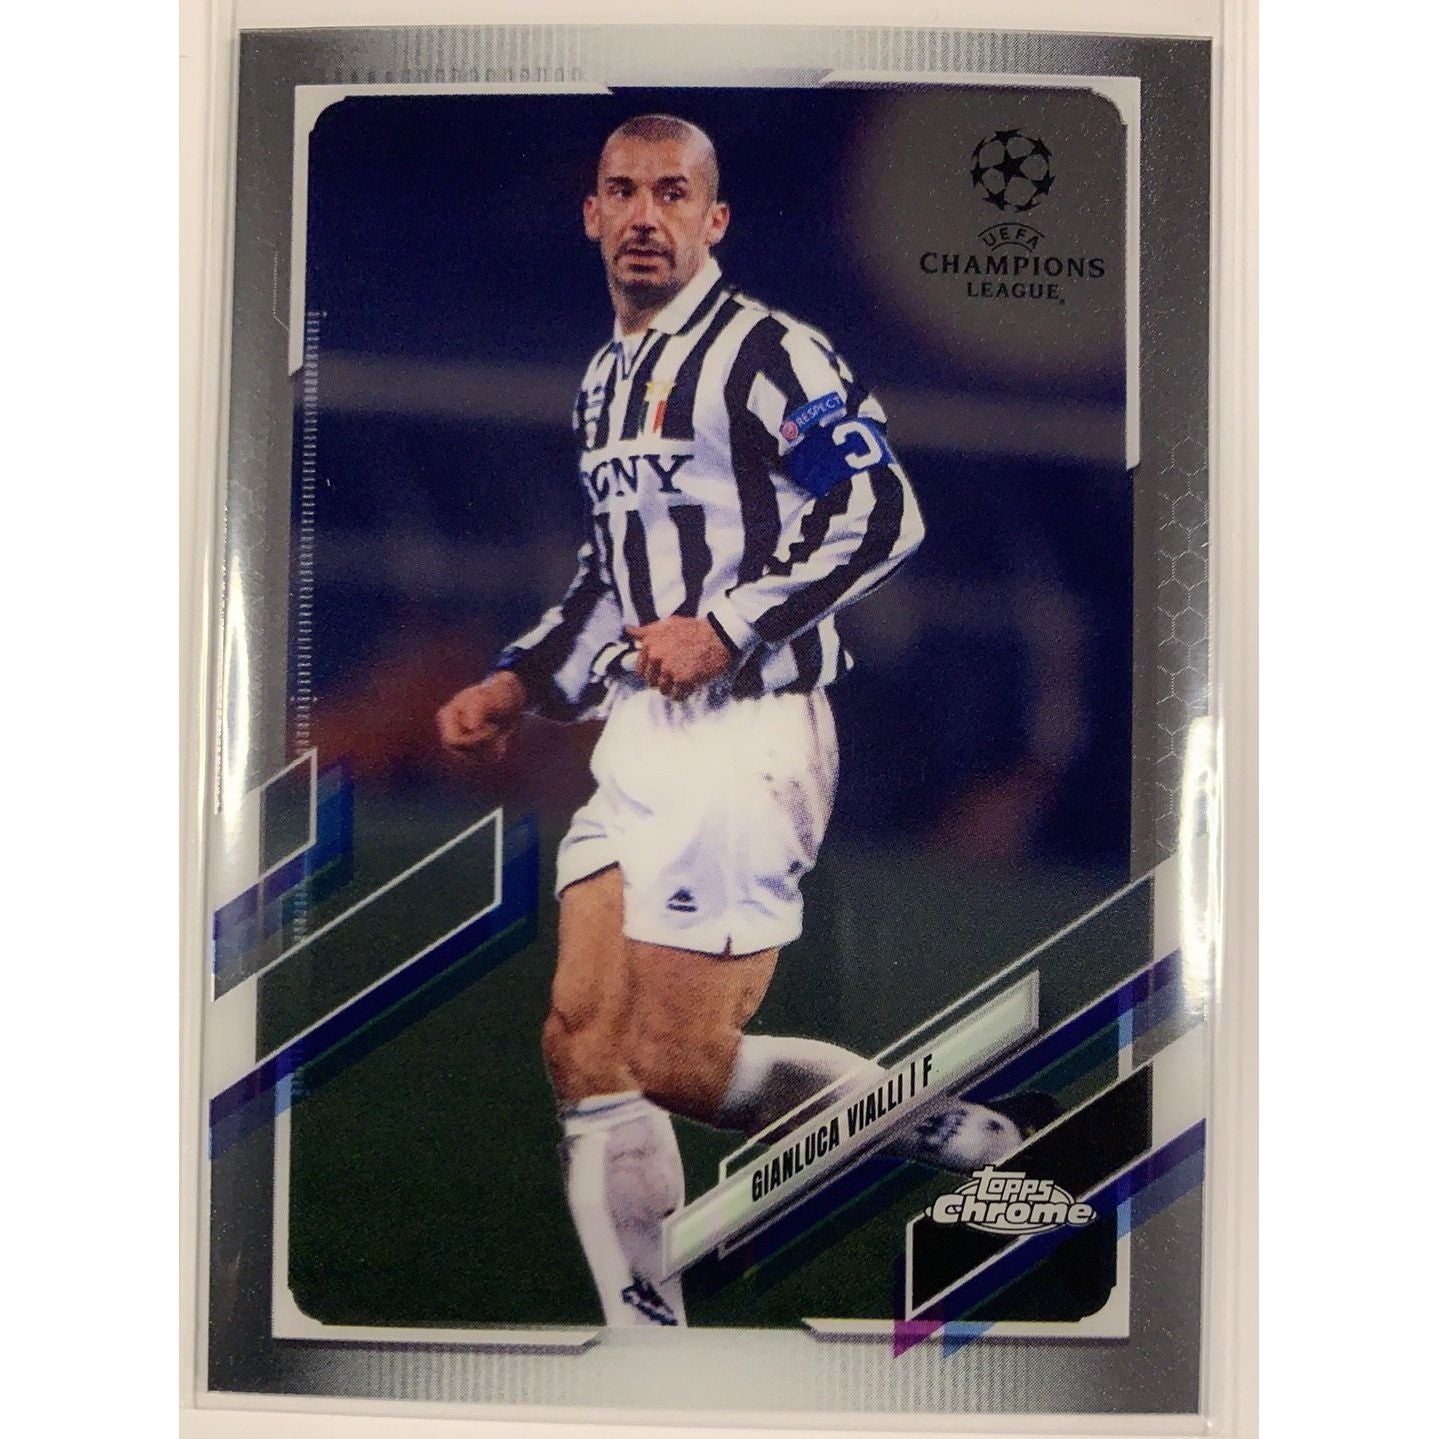  2021 Topps Chrome UEFA Champions League Gianluca Vialli Base #52  Local Legends Cards & Collectibles